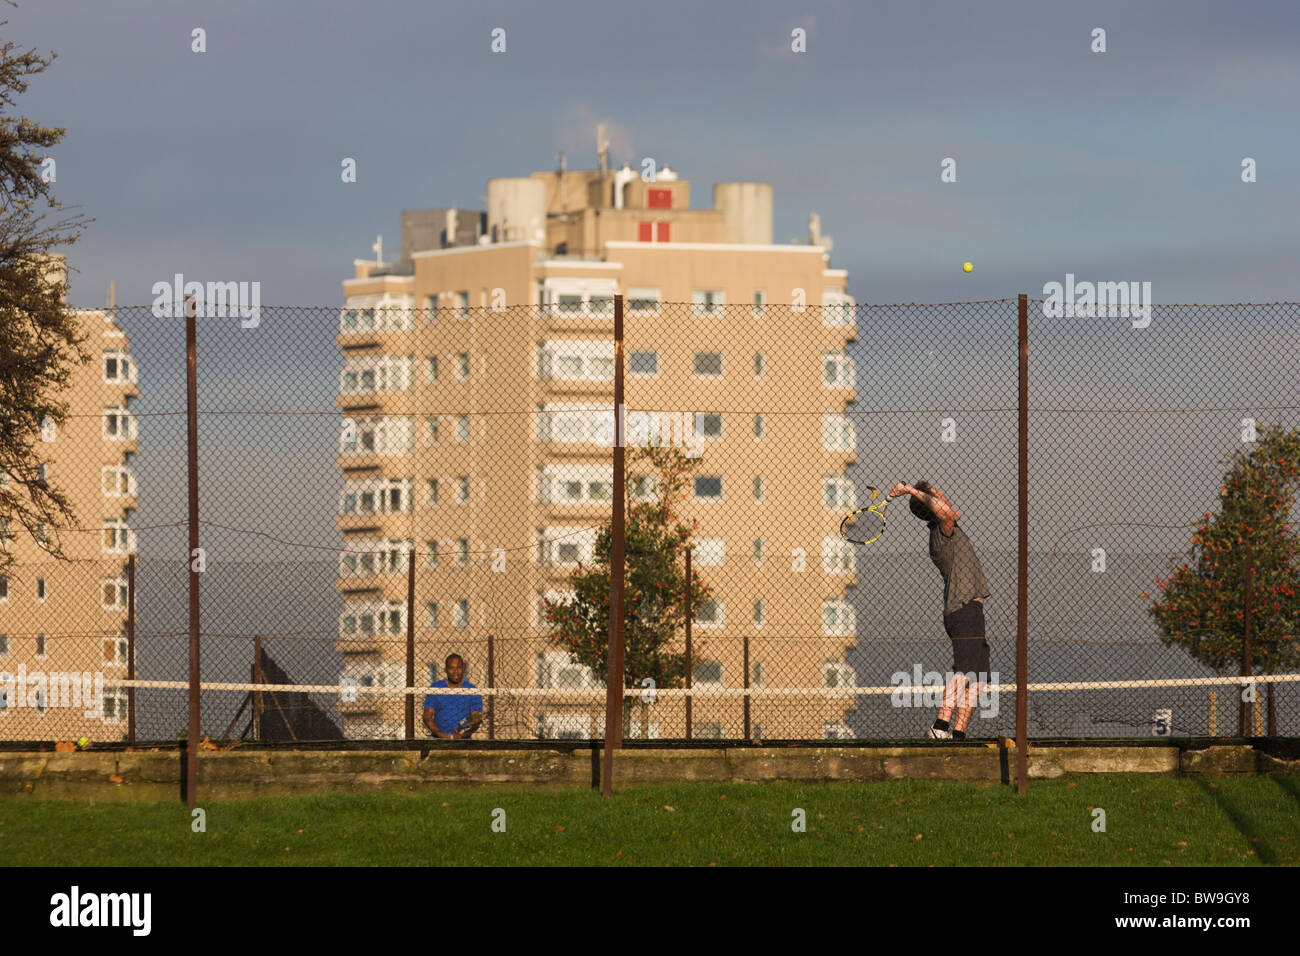 Amateur tennis serve in local court near high-rise flats seen from Brockwell Park, Herne Hill, South London. Stock Photo